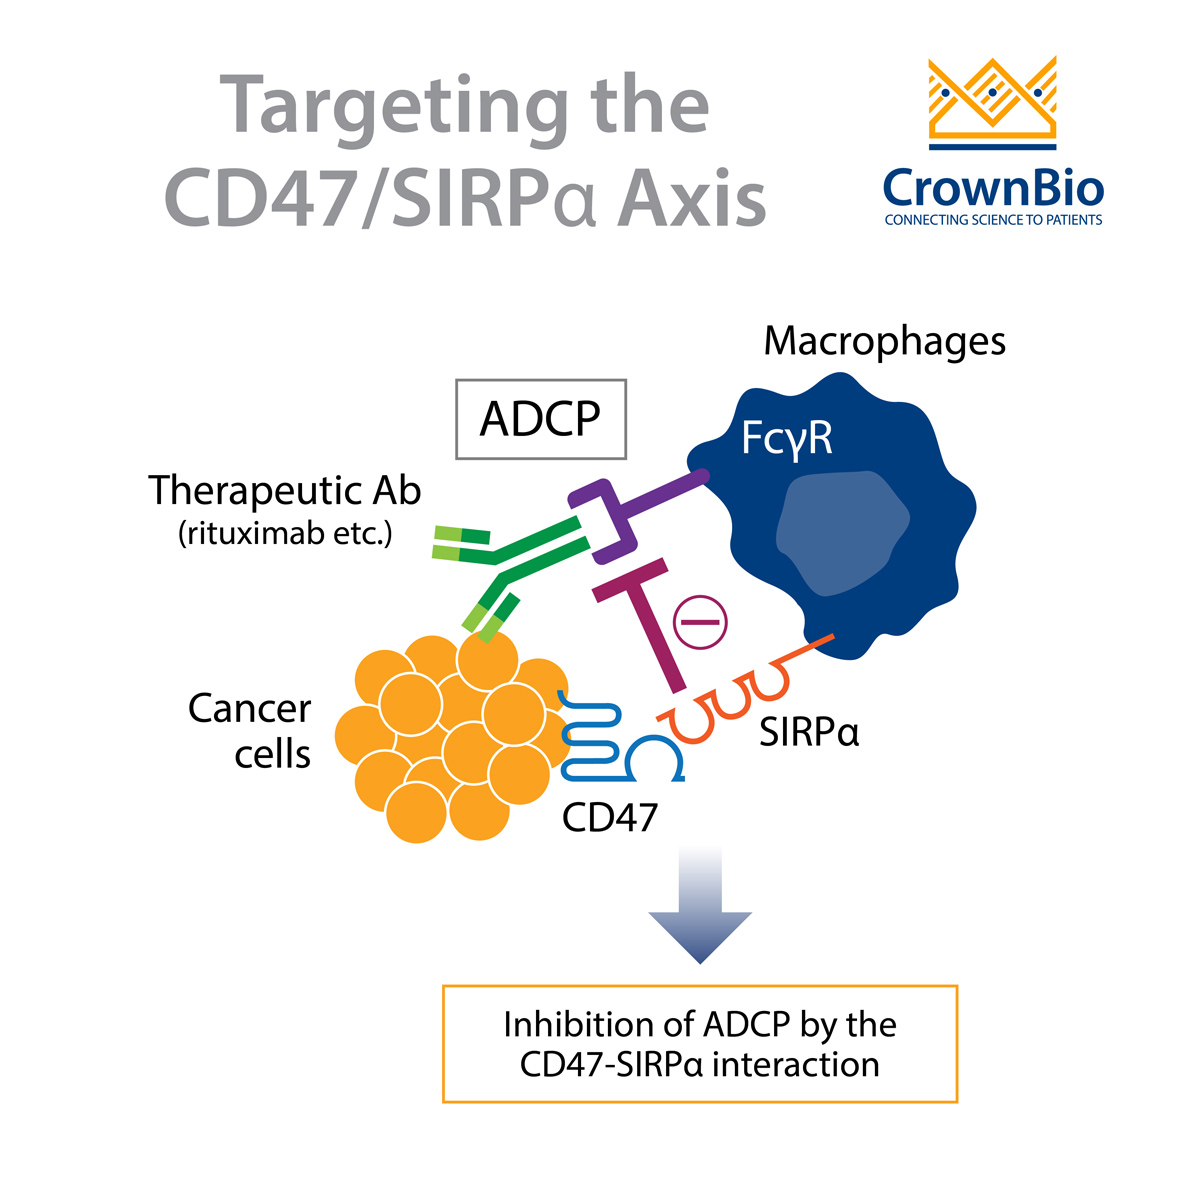 Targeting the CD47/SIRPɑ Axis in Cancer Immunotherapy